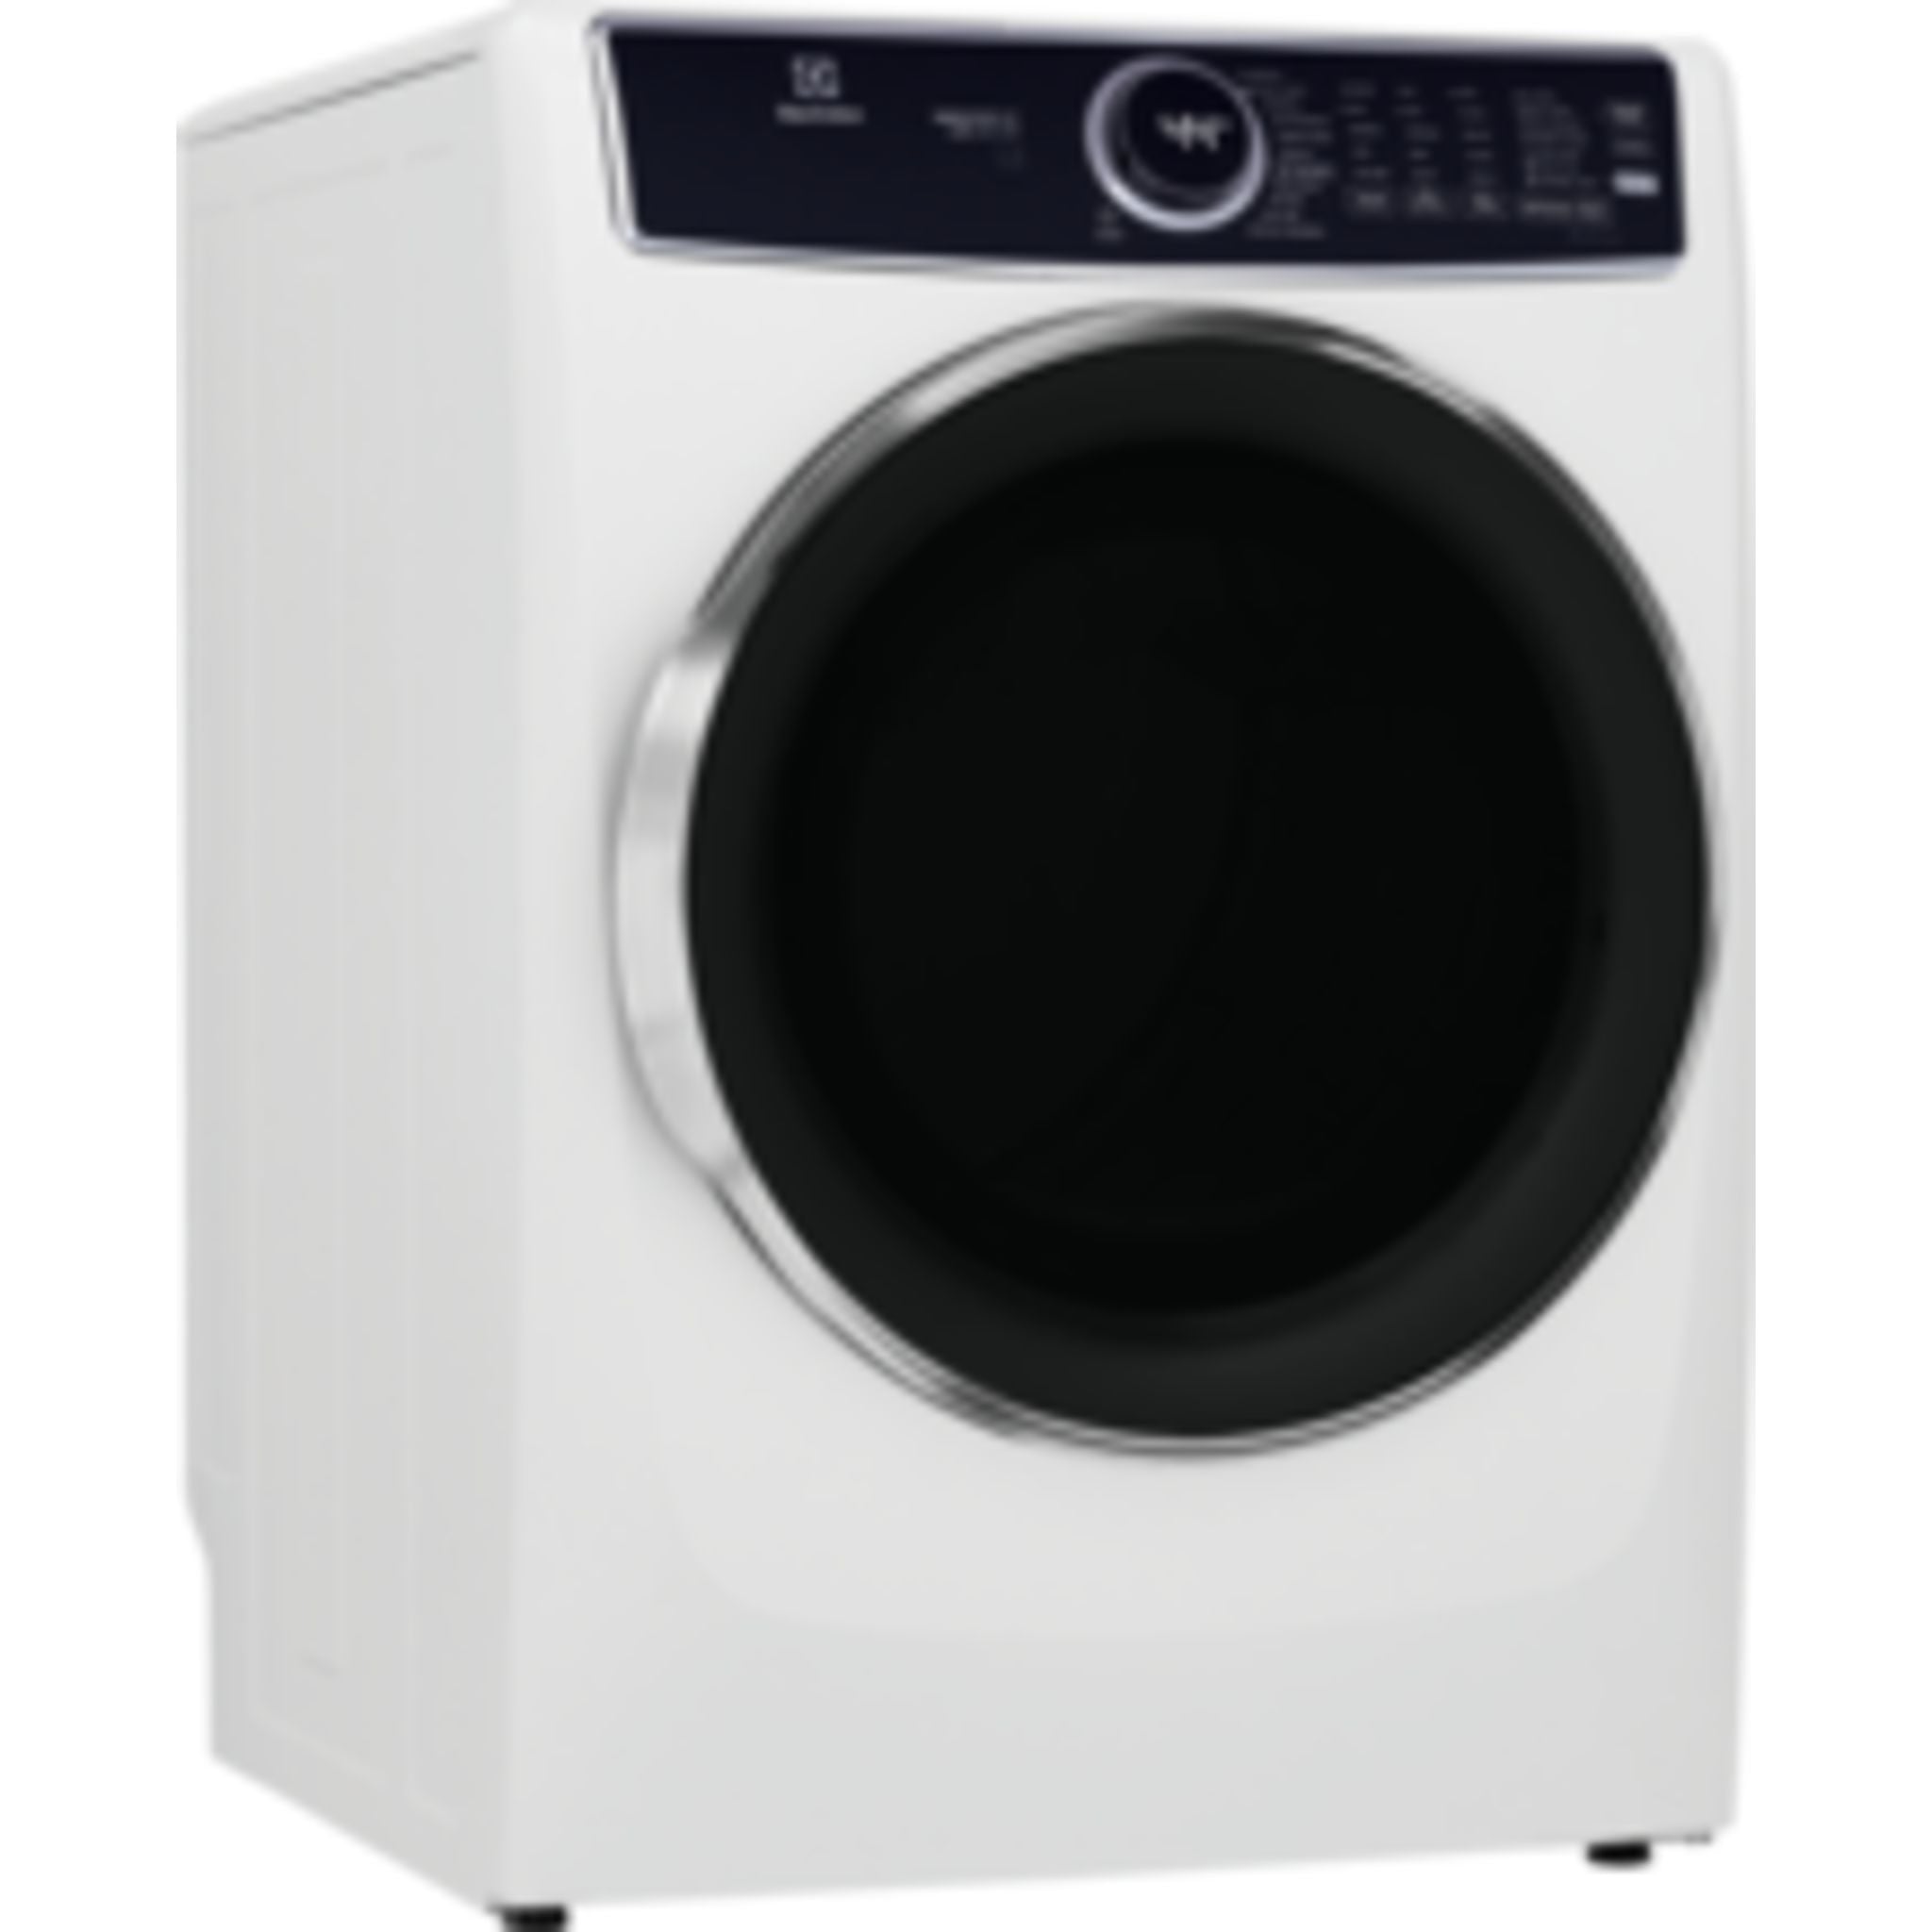 Electrolux Home Products, Electrolux Gas Dryer (ELFG7637AW) - White